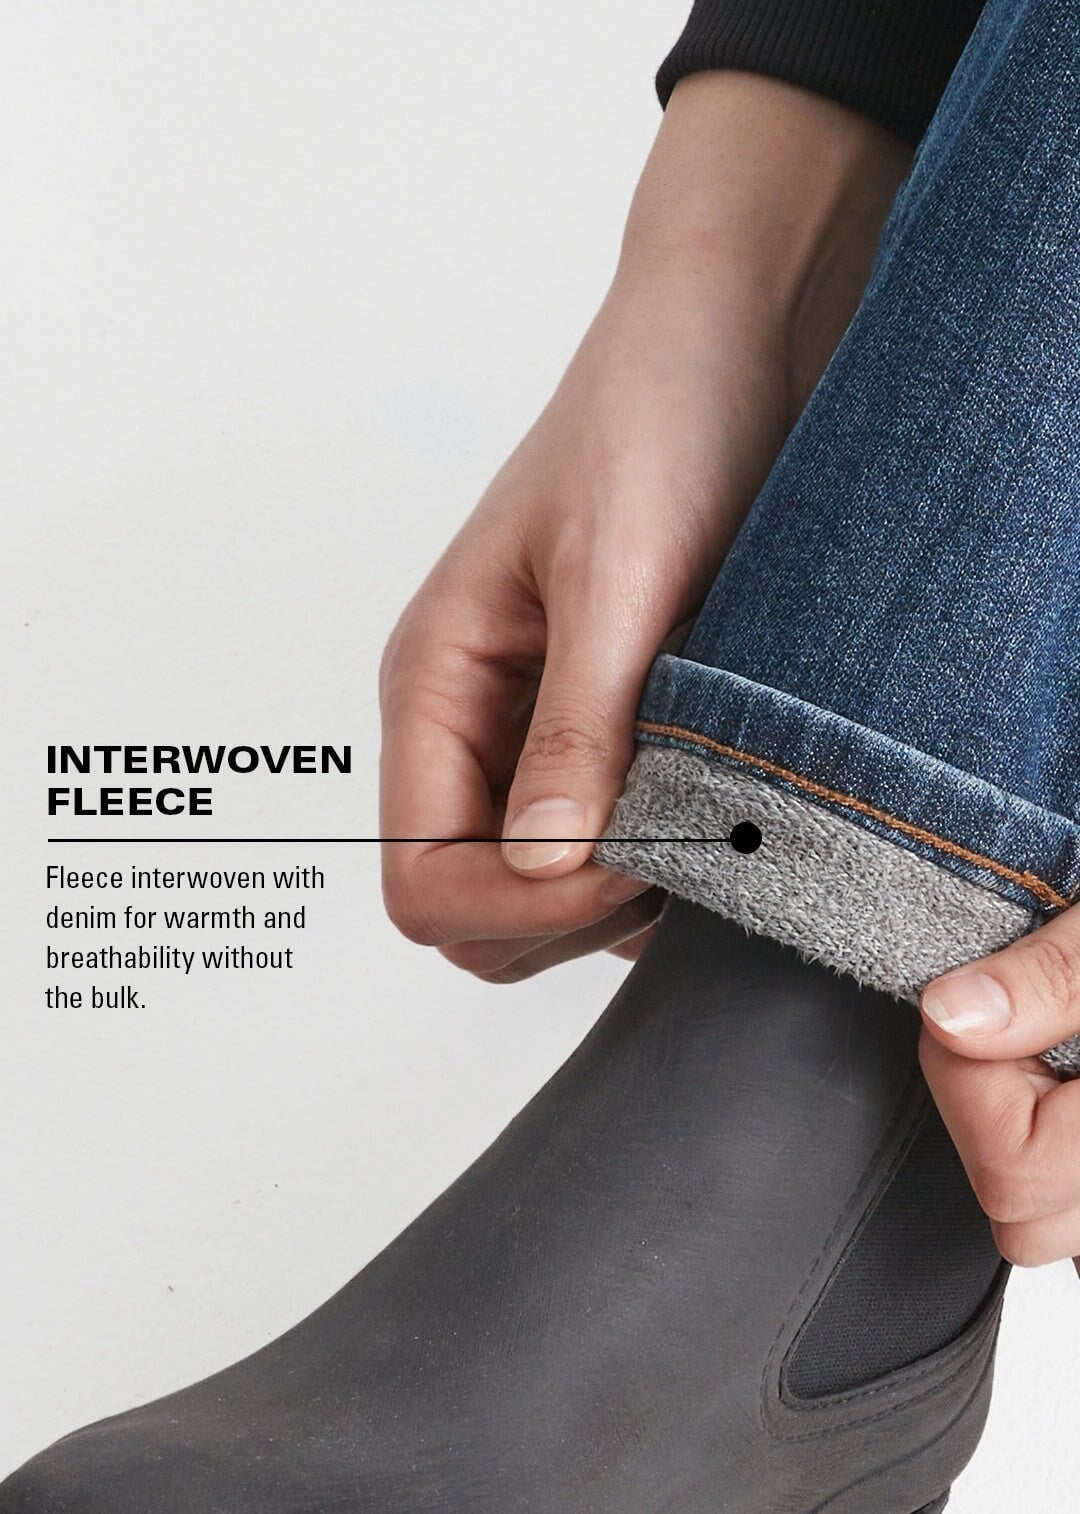 jeans with interwoven fleece for warmth and breathability without the bulk